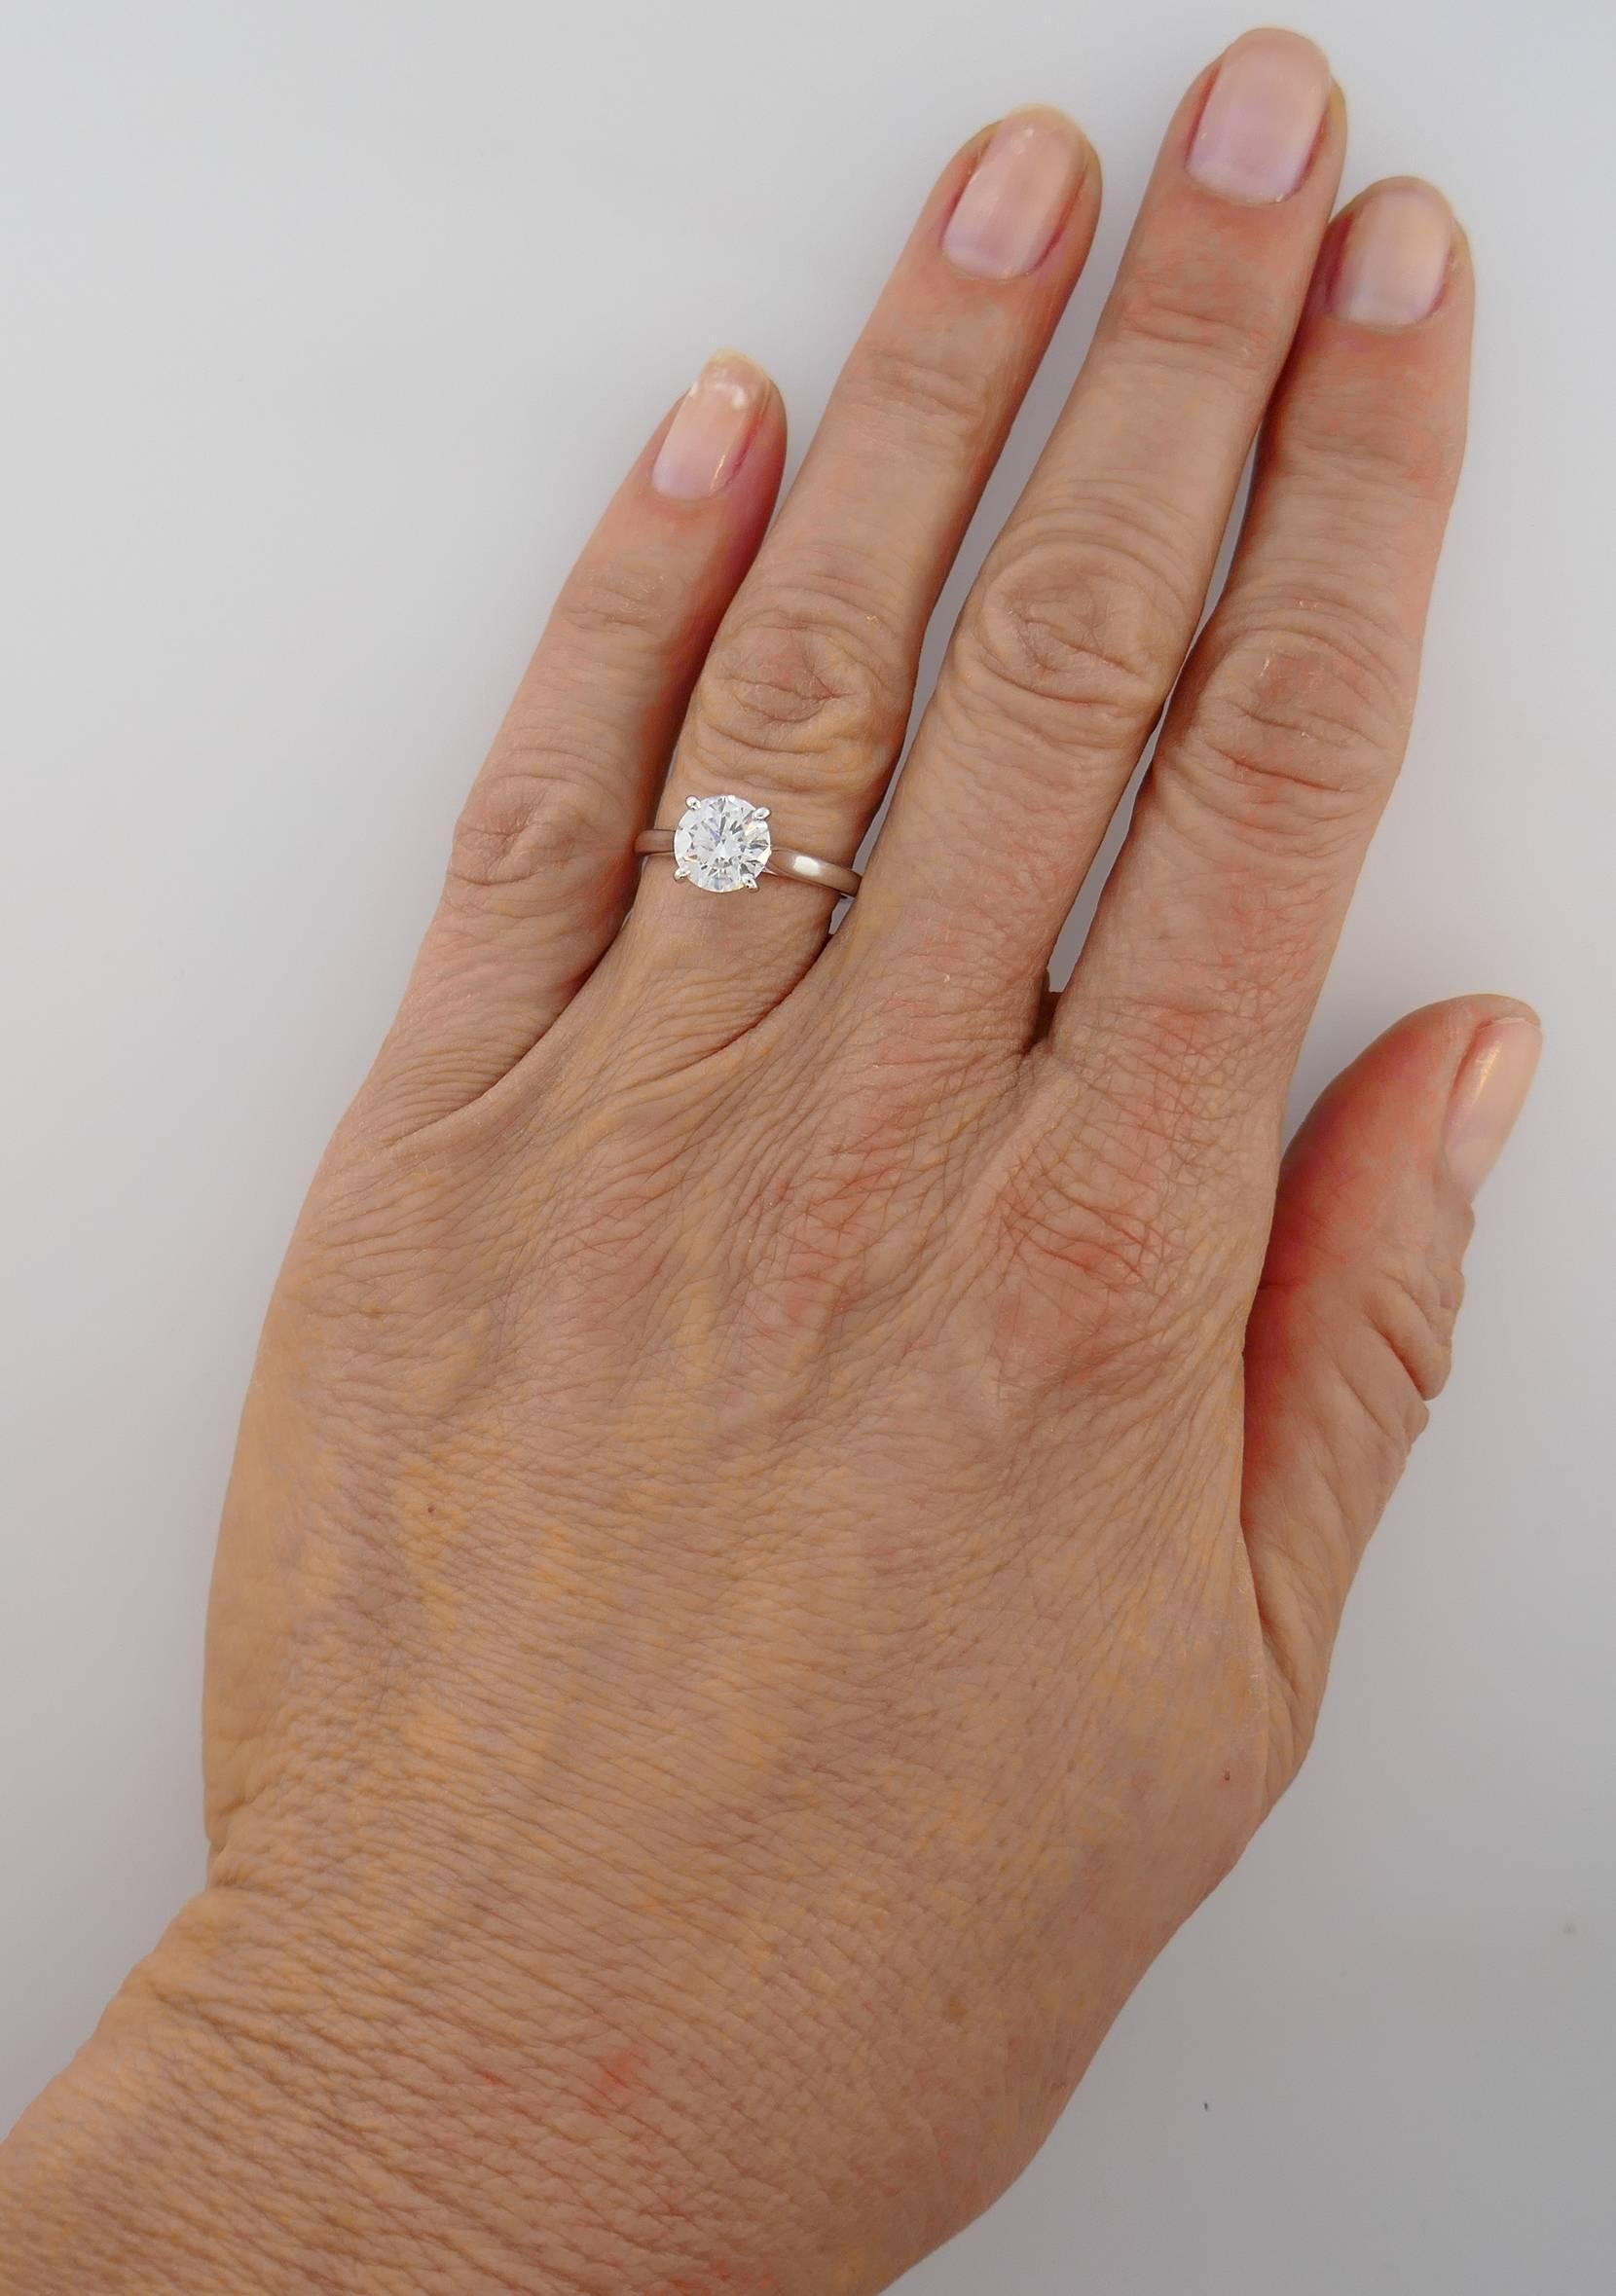 Classic solitaire diamond engagement ring. This solitaire has been a Cartier classic since 1895. The elegance of the lines is unique, the refined and open setting allows the light of the diamond to flow freely. Features a 1.50-carat round brilliant